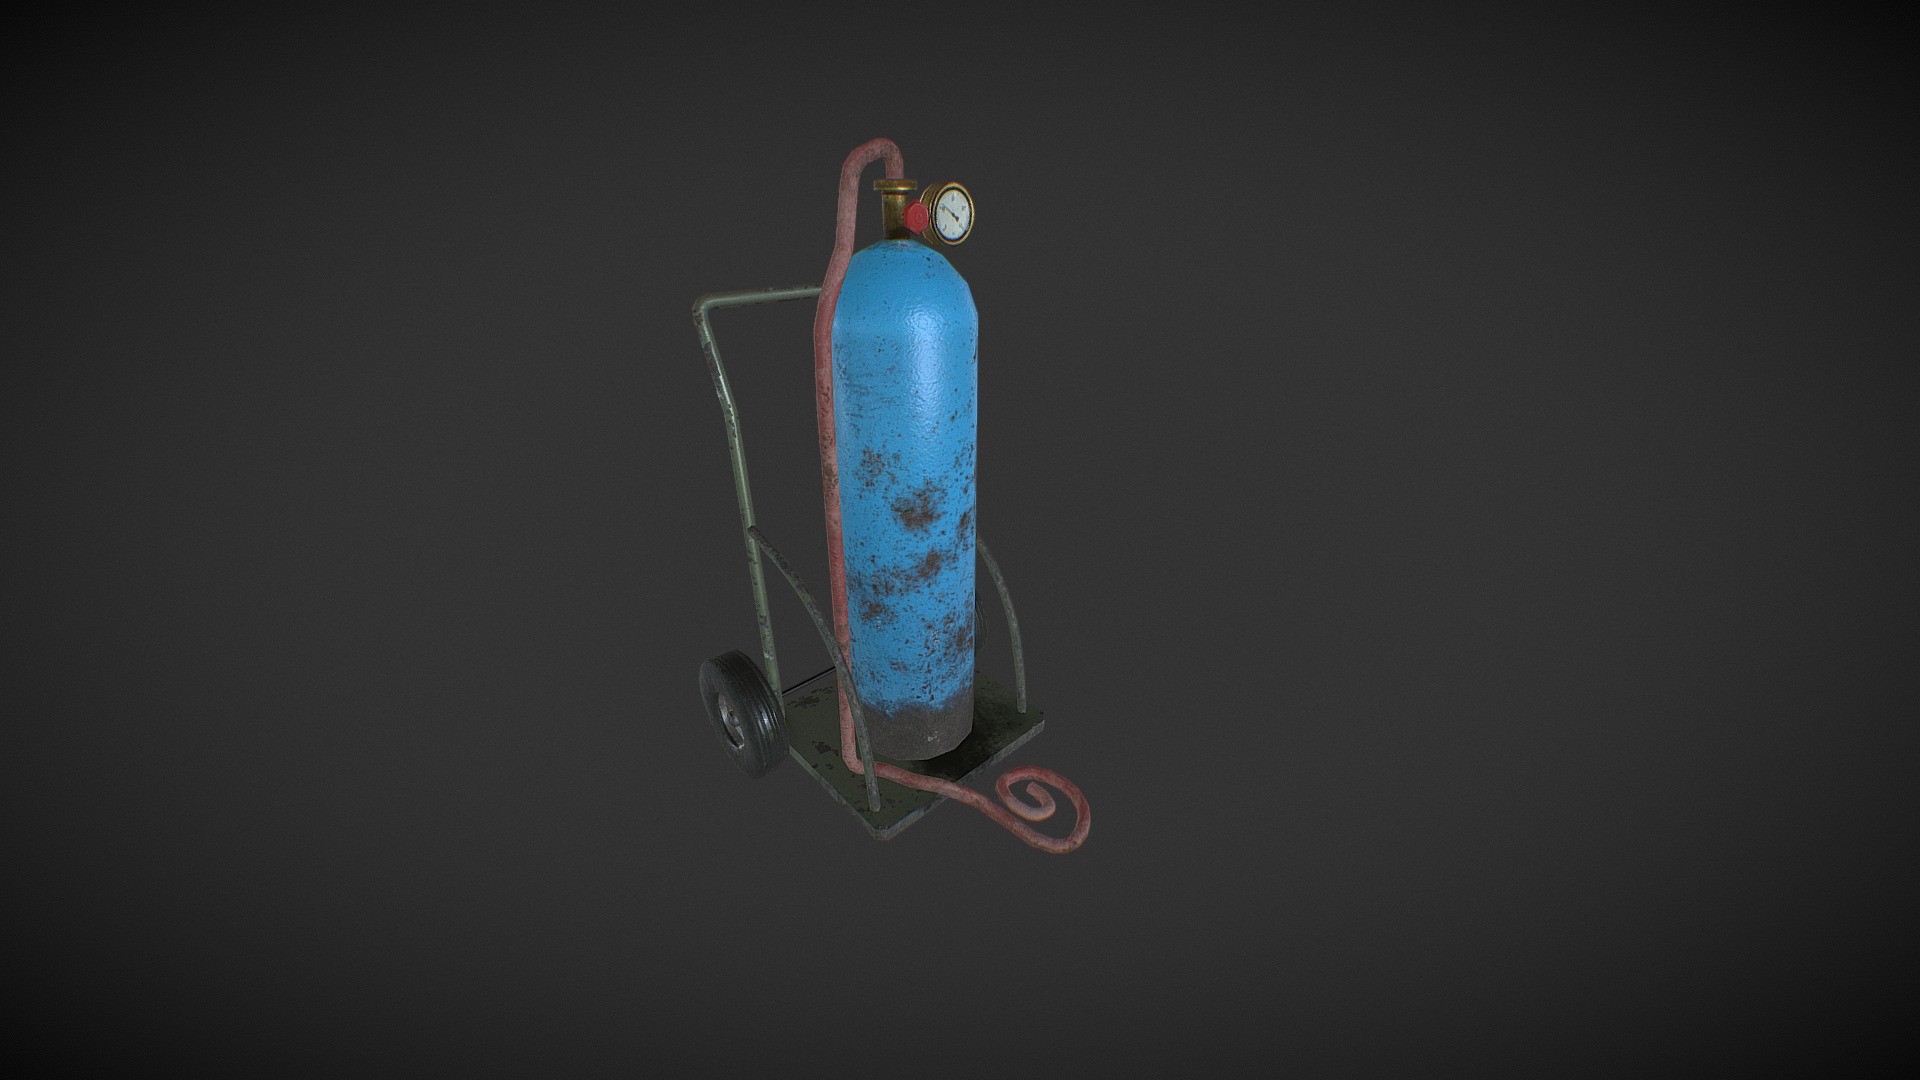 3D model GasWheel pbr - This is a 3D model of the GasWheel pbr. The 3D model is about a blue and red sword.